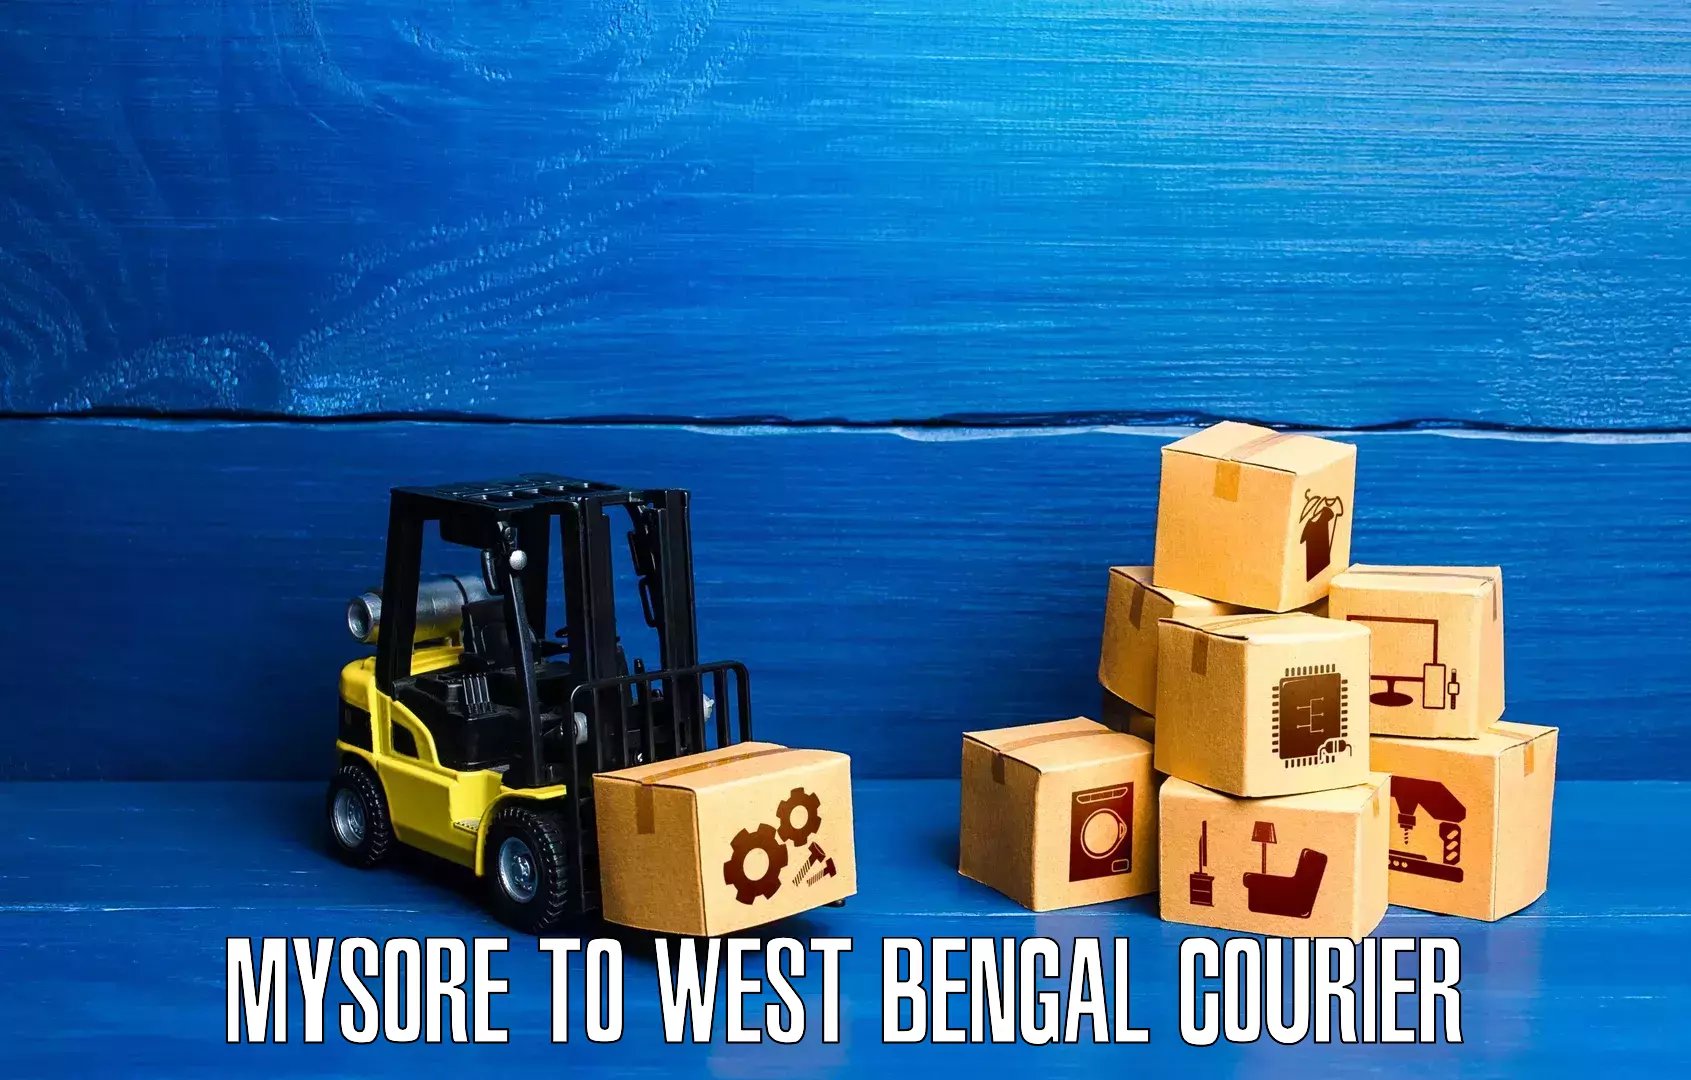 Comprehensive shipping network Mysore to West Bengal